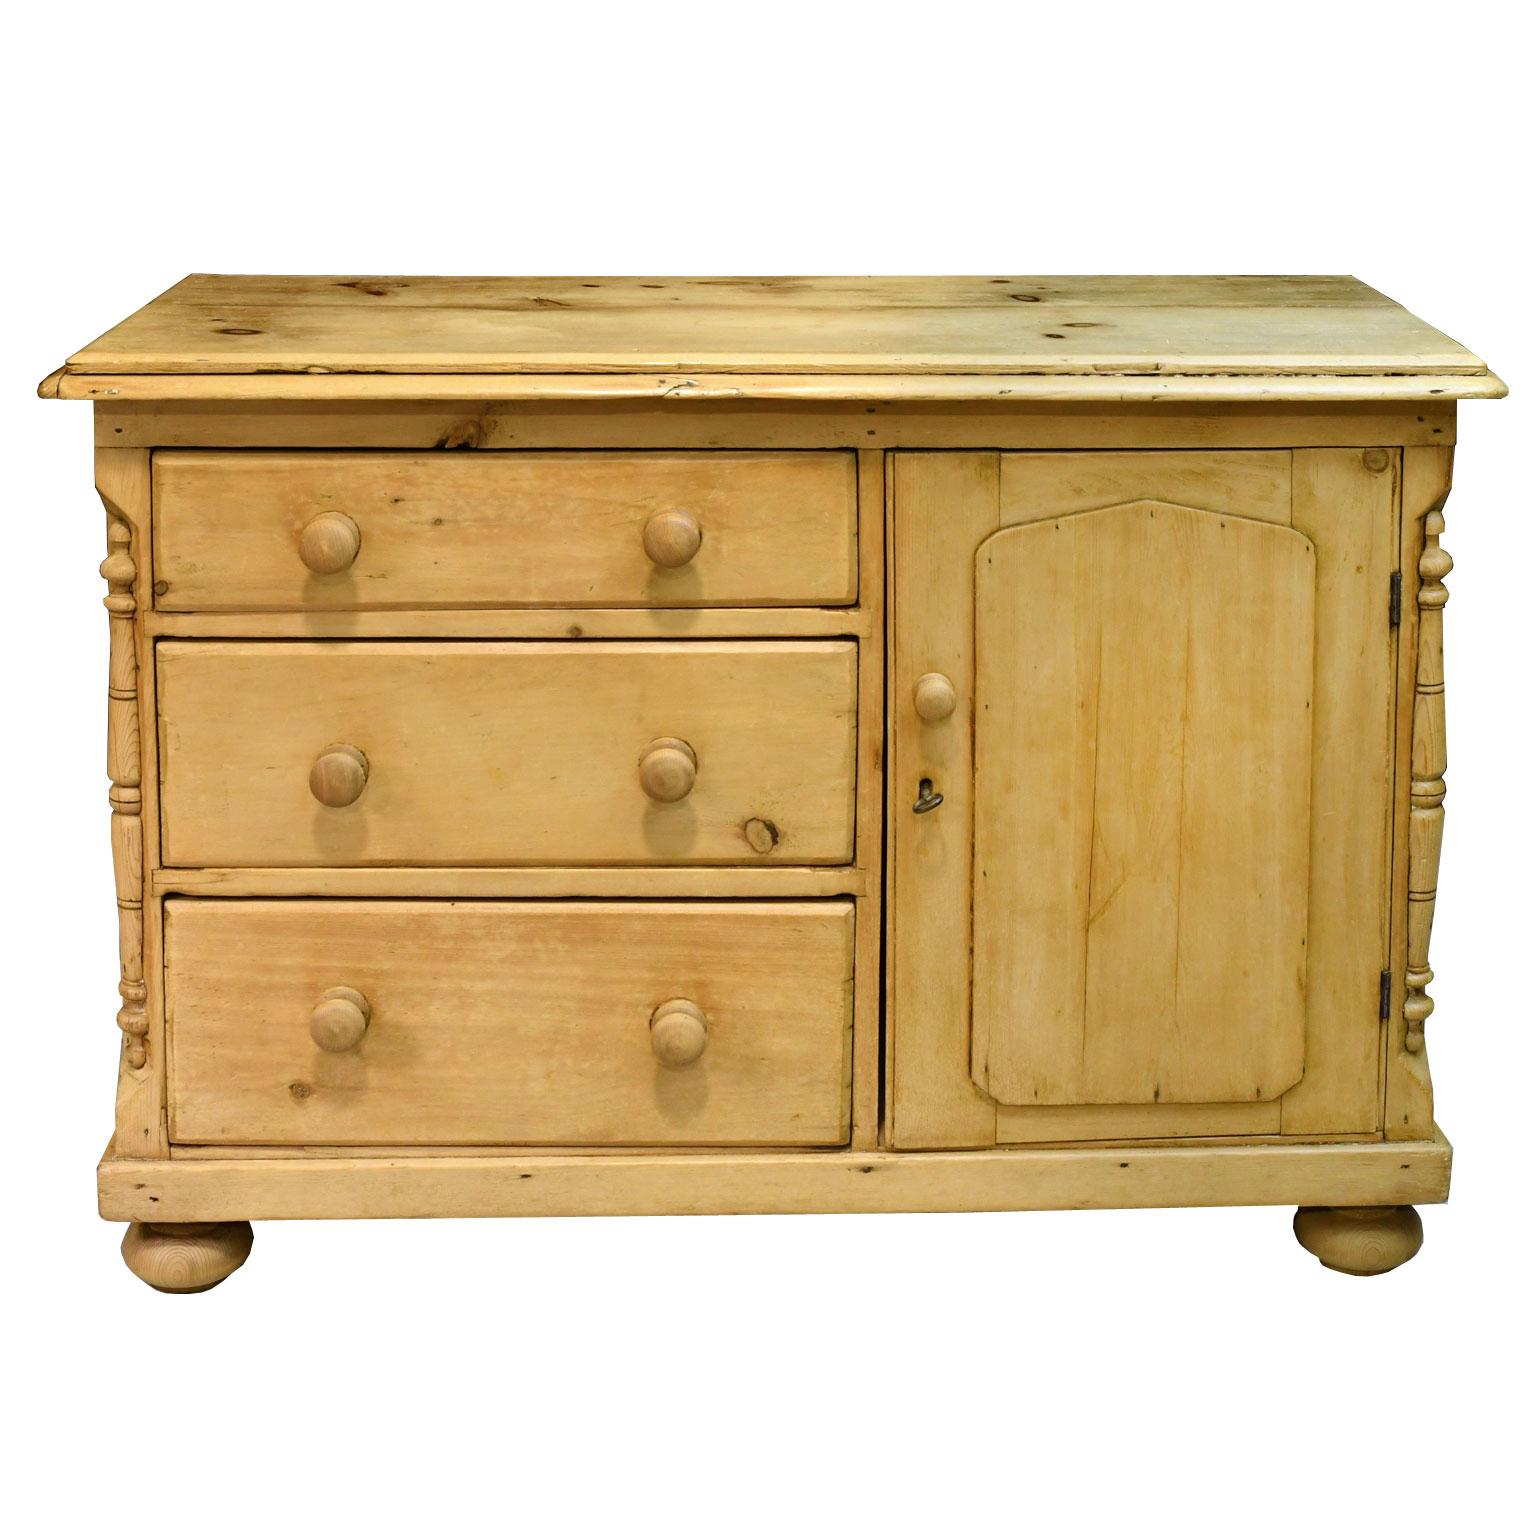 A charming English country dresser in natural, light-colored pine with a flight of three drawers and a cupboard, all with turned wooden pulls, lock and key. Cabinet rests on turned bun feet and has turned decorative elements embellishing the